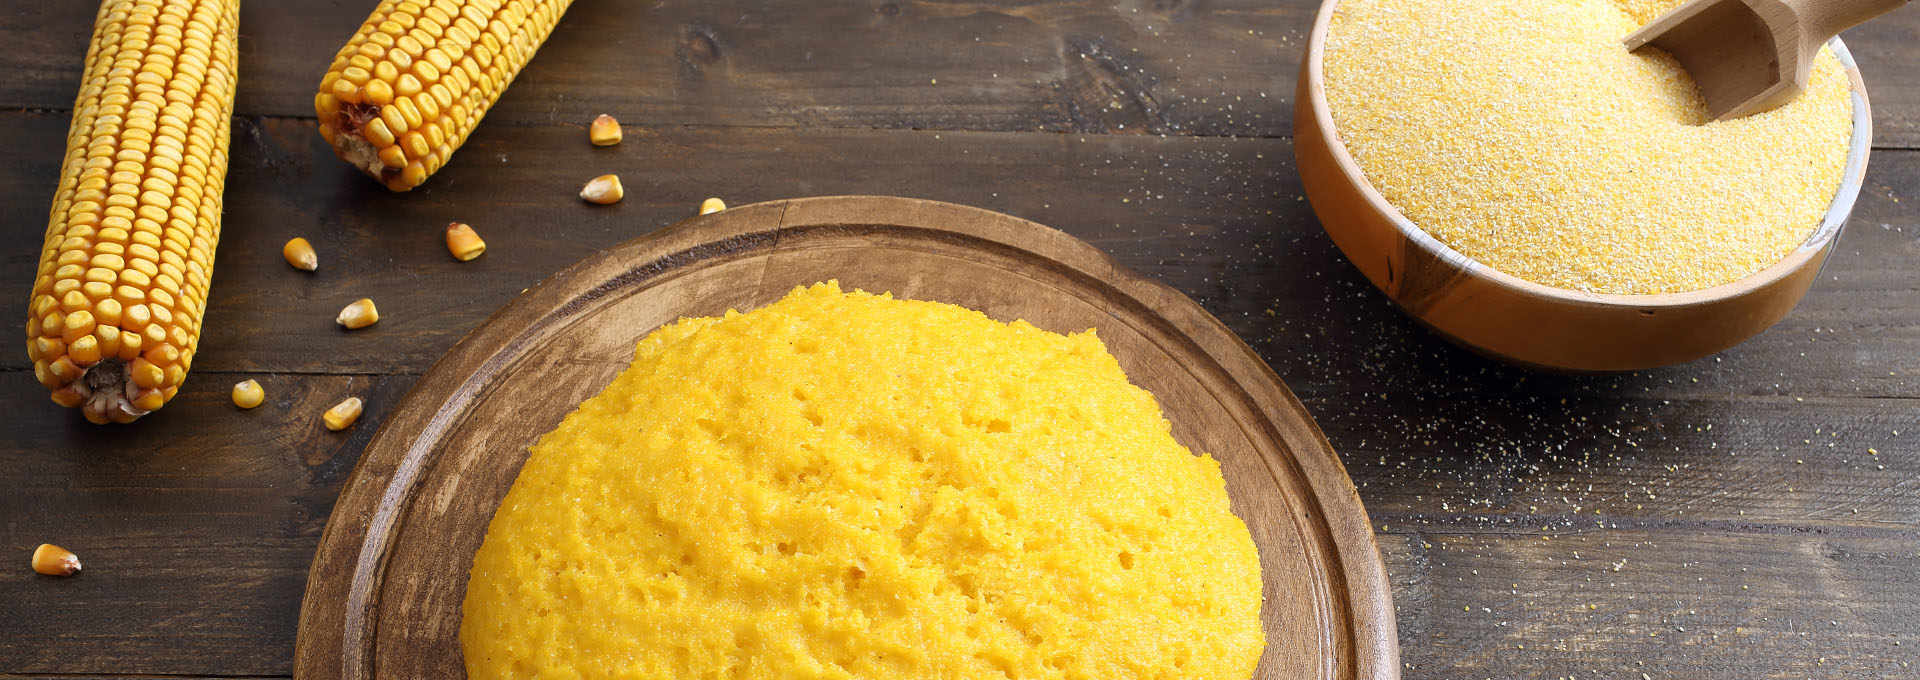 Polenta: the food that transformed the West